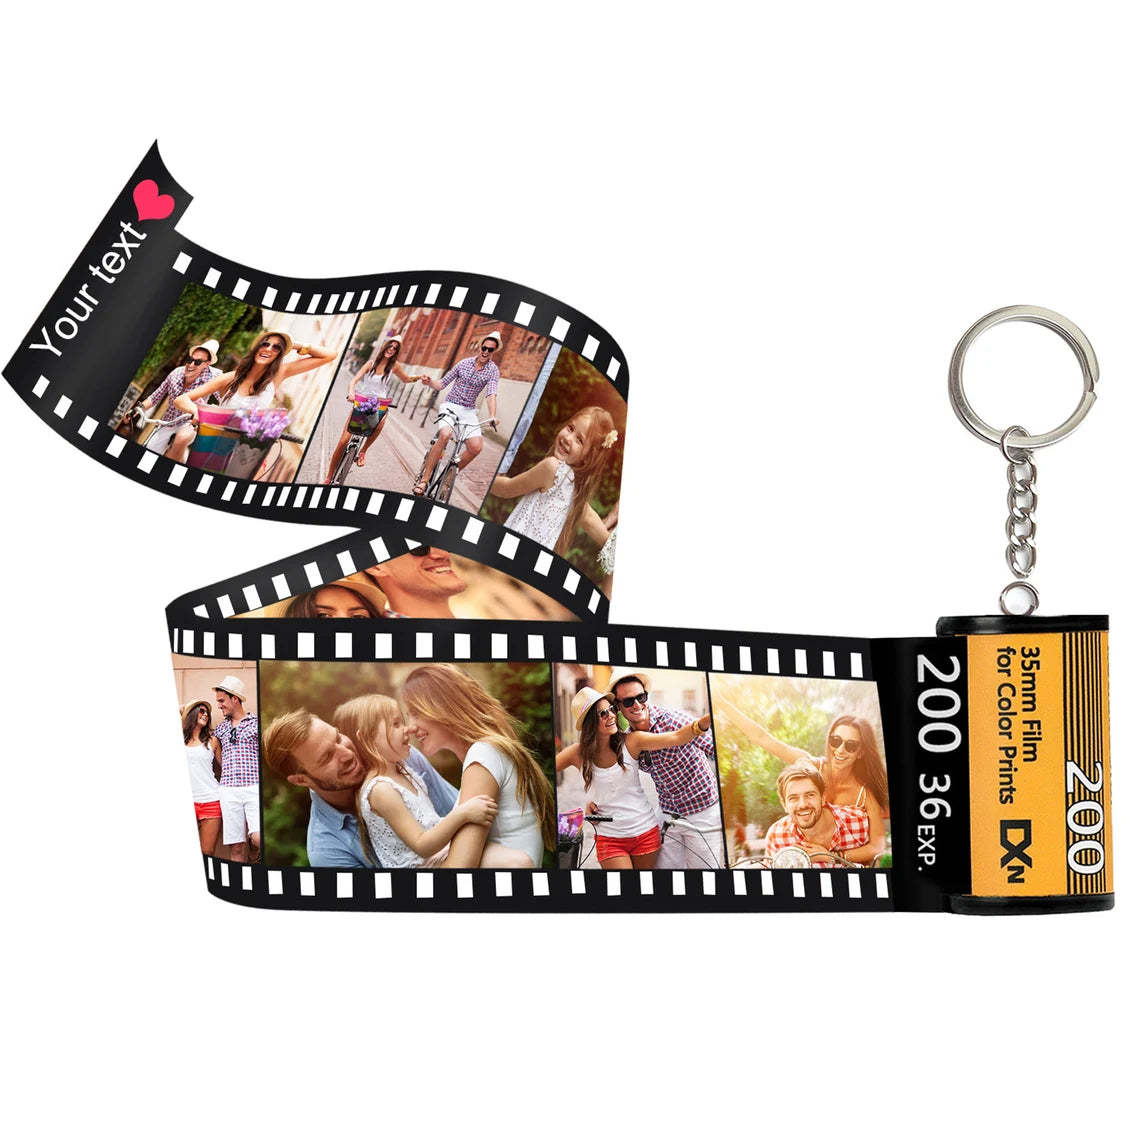 Custom Text For The Film Roll Keychain Personalised Picture Keychain with Reel Album Customized Gift for Christmas - soufeeluk